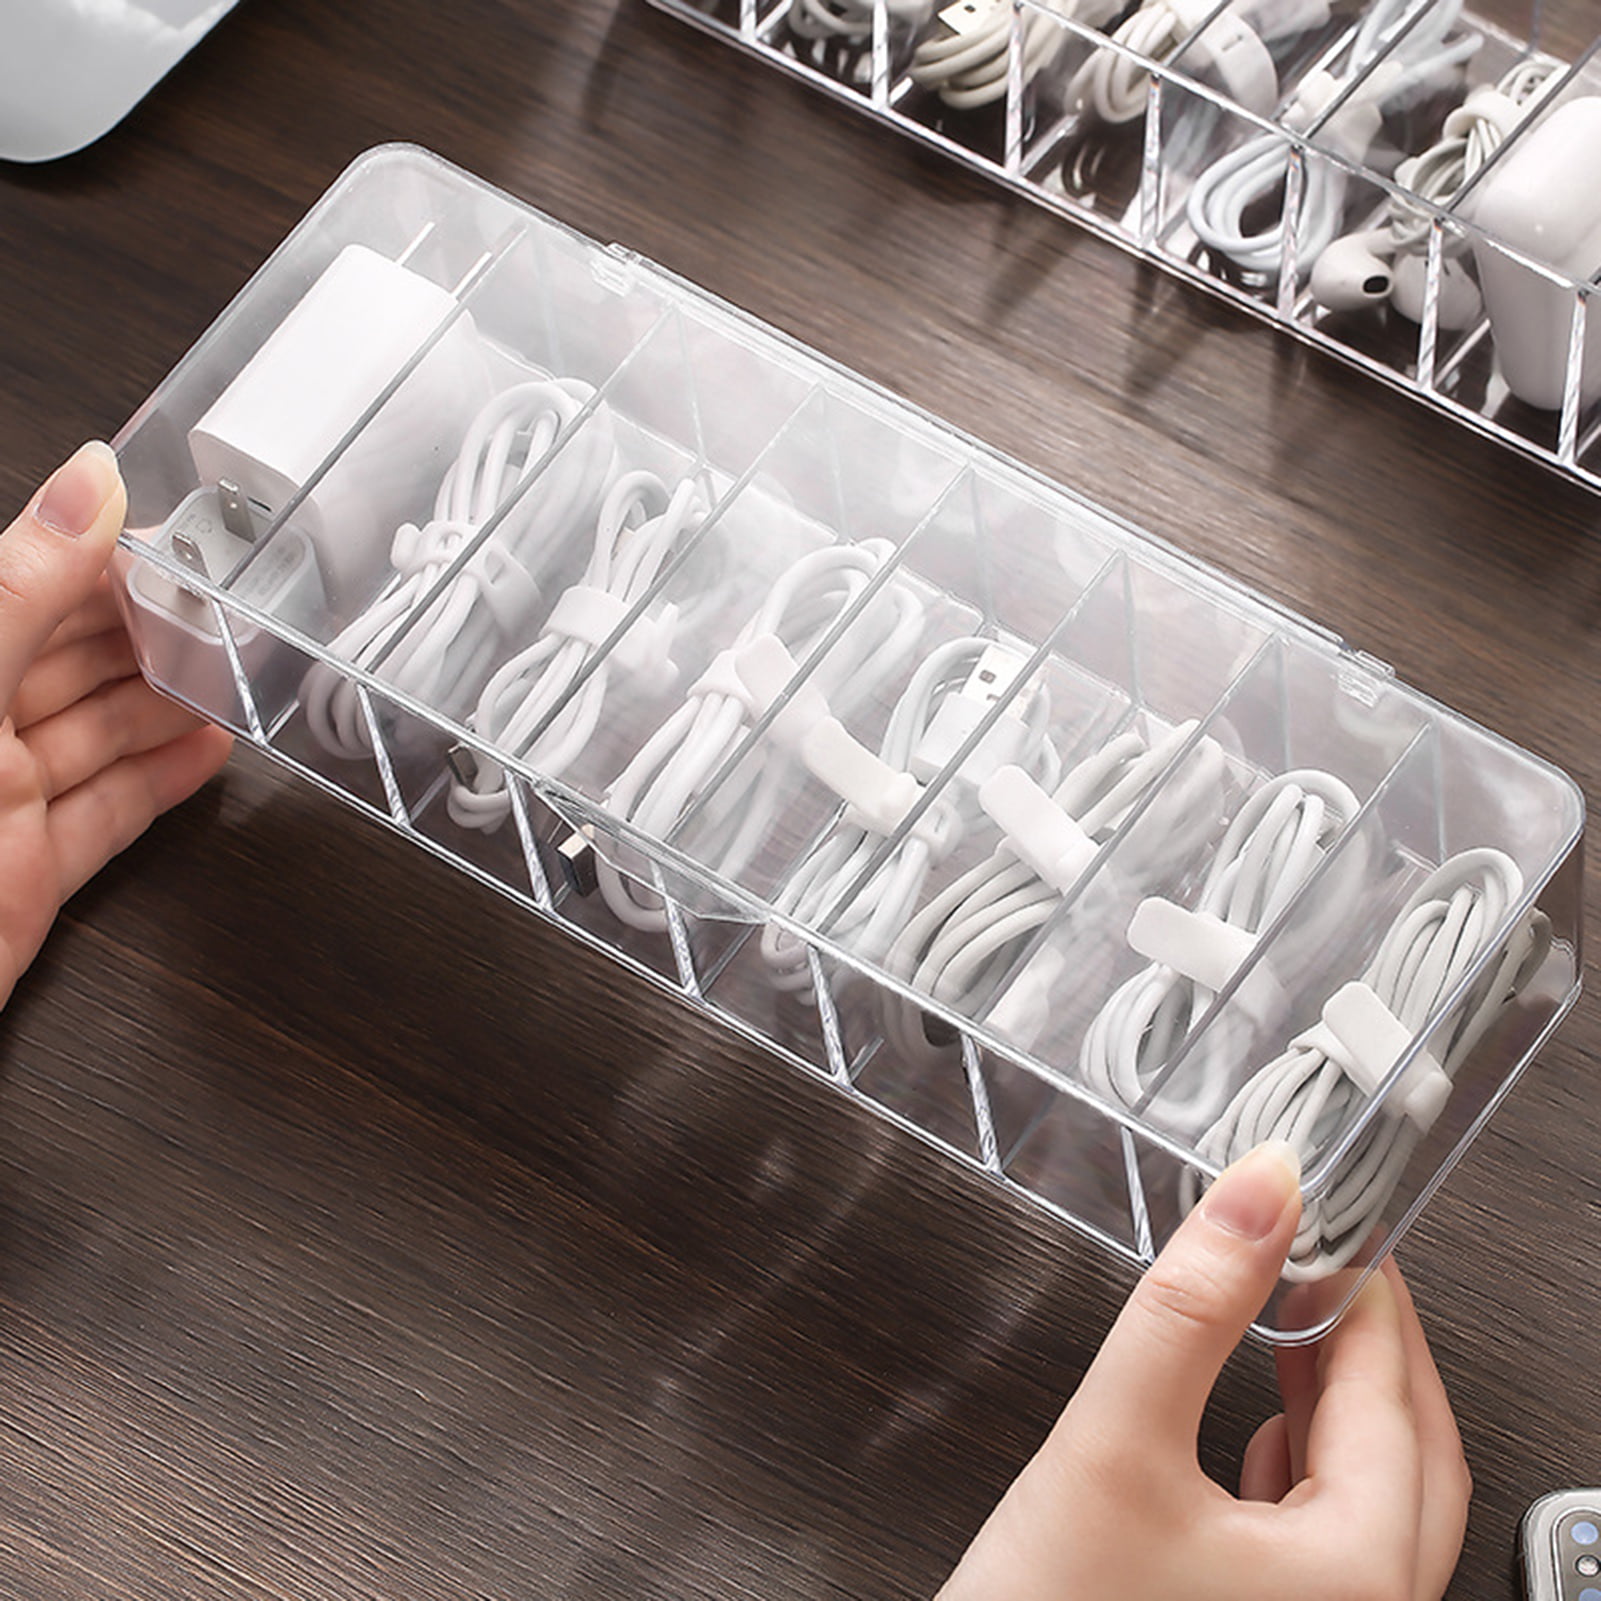 Baywell Plastic Cable Management Box, Clear Cord Storage Organizer